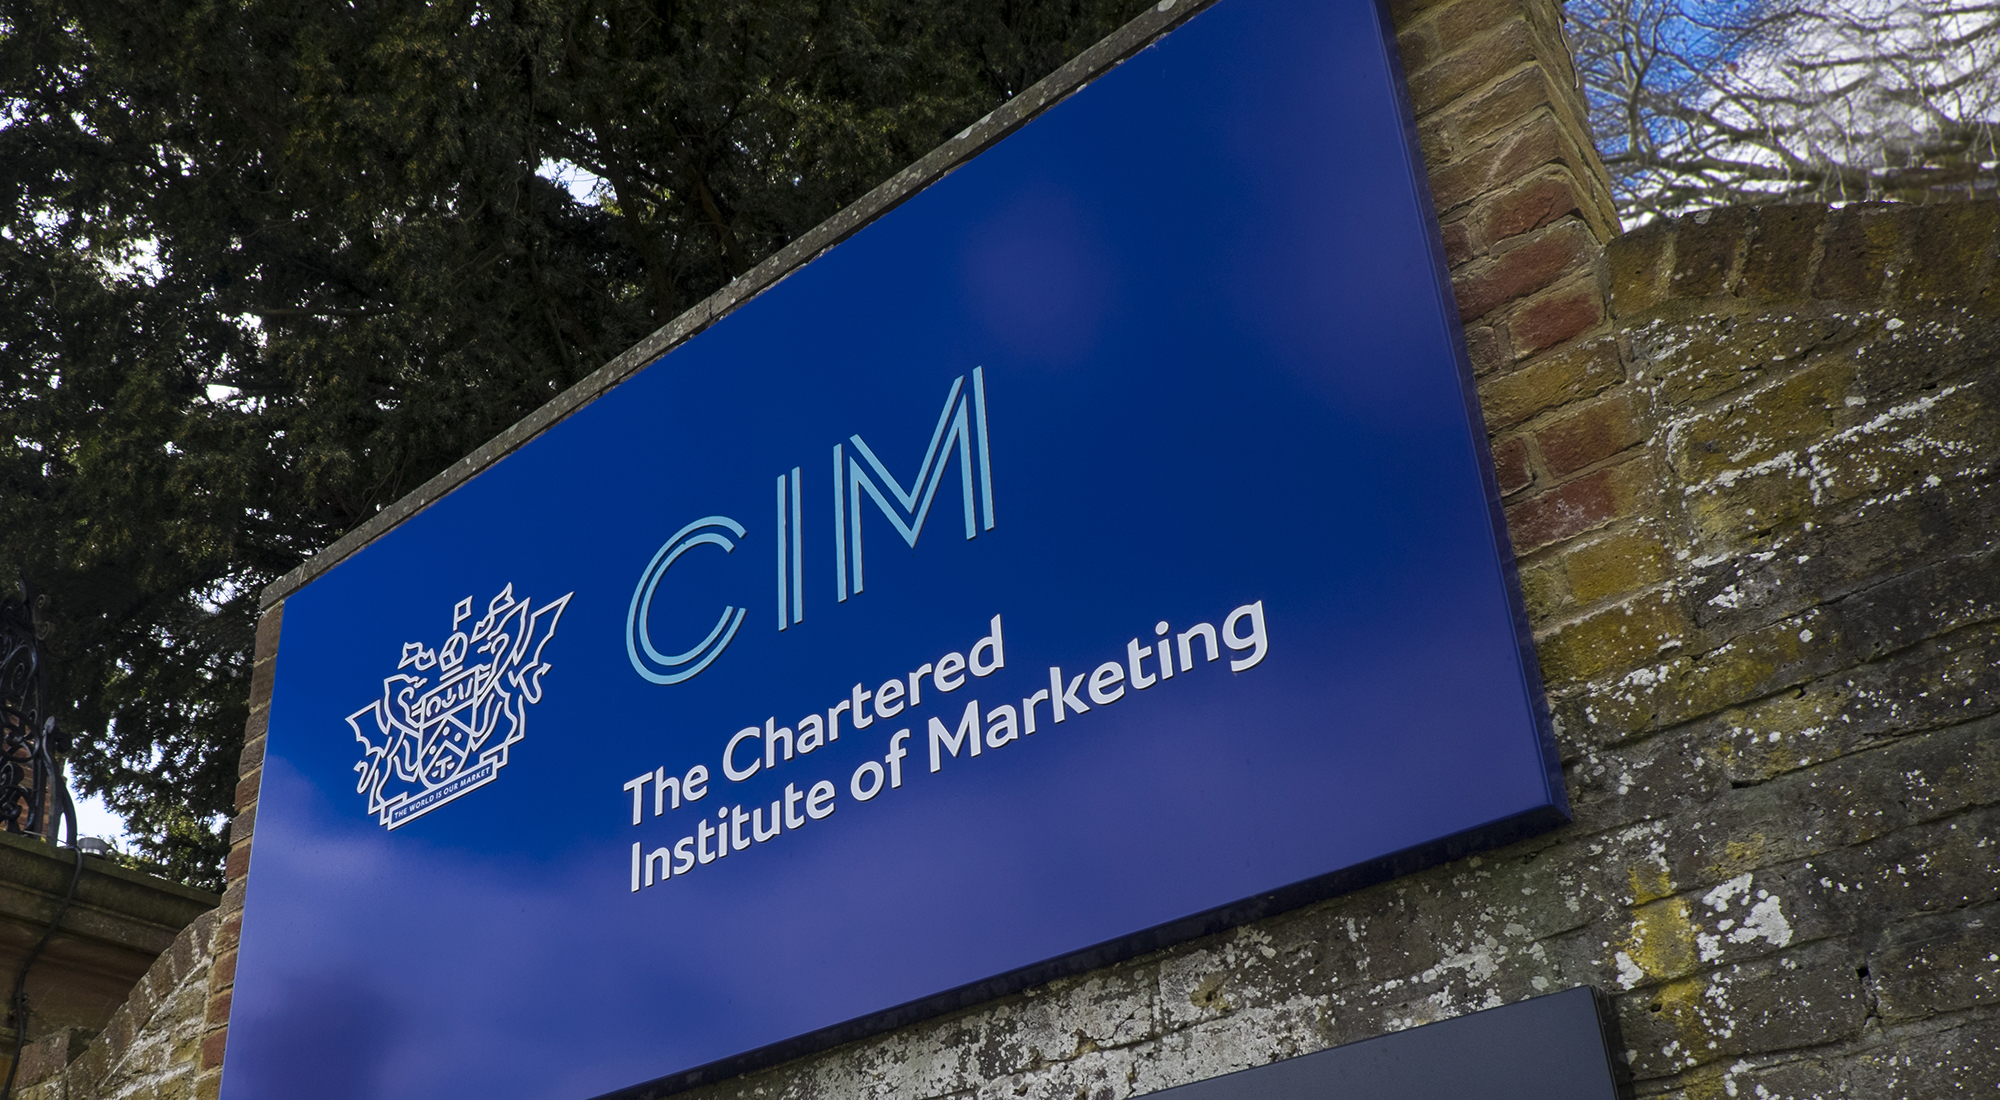 The Chartered Institute for Marketing (CIM)